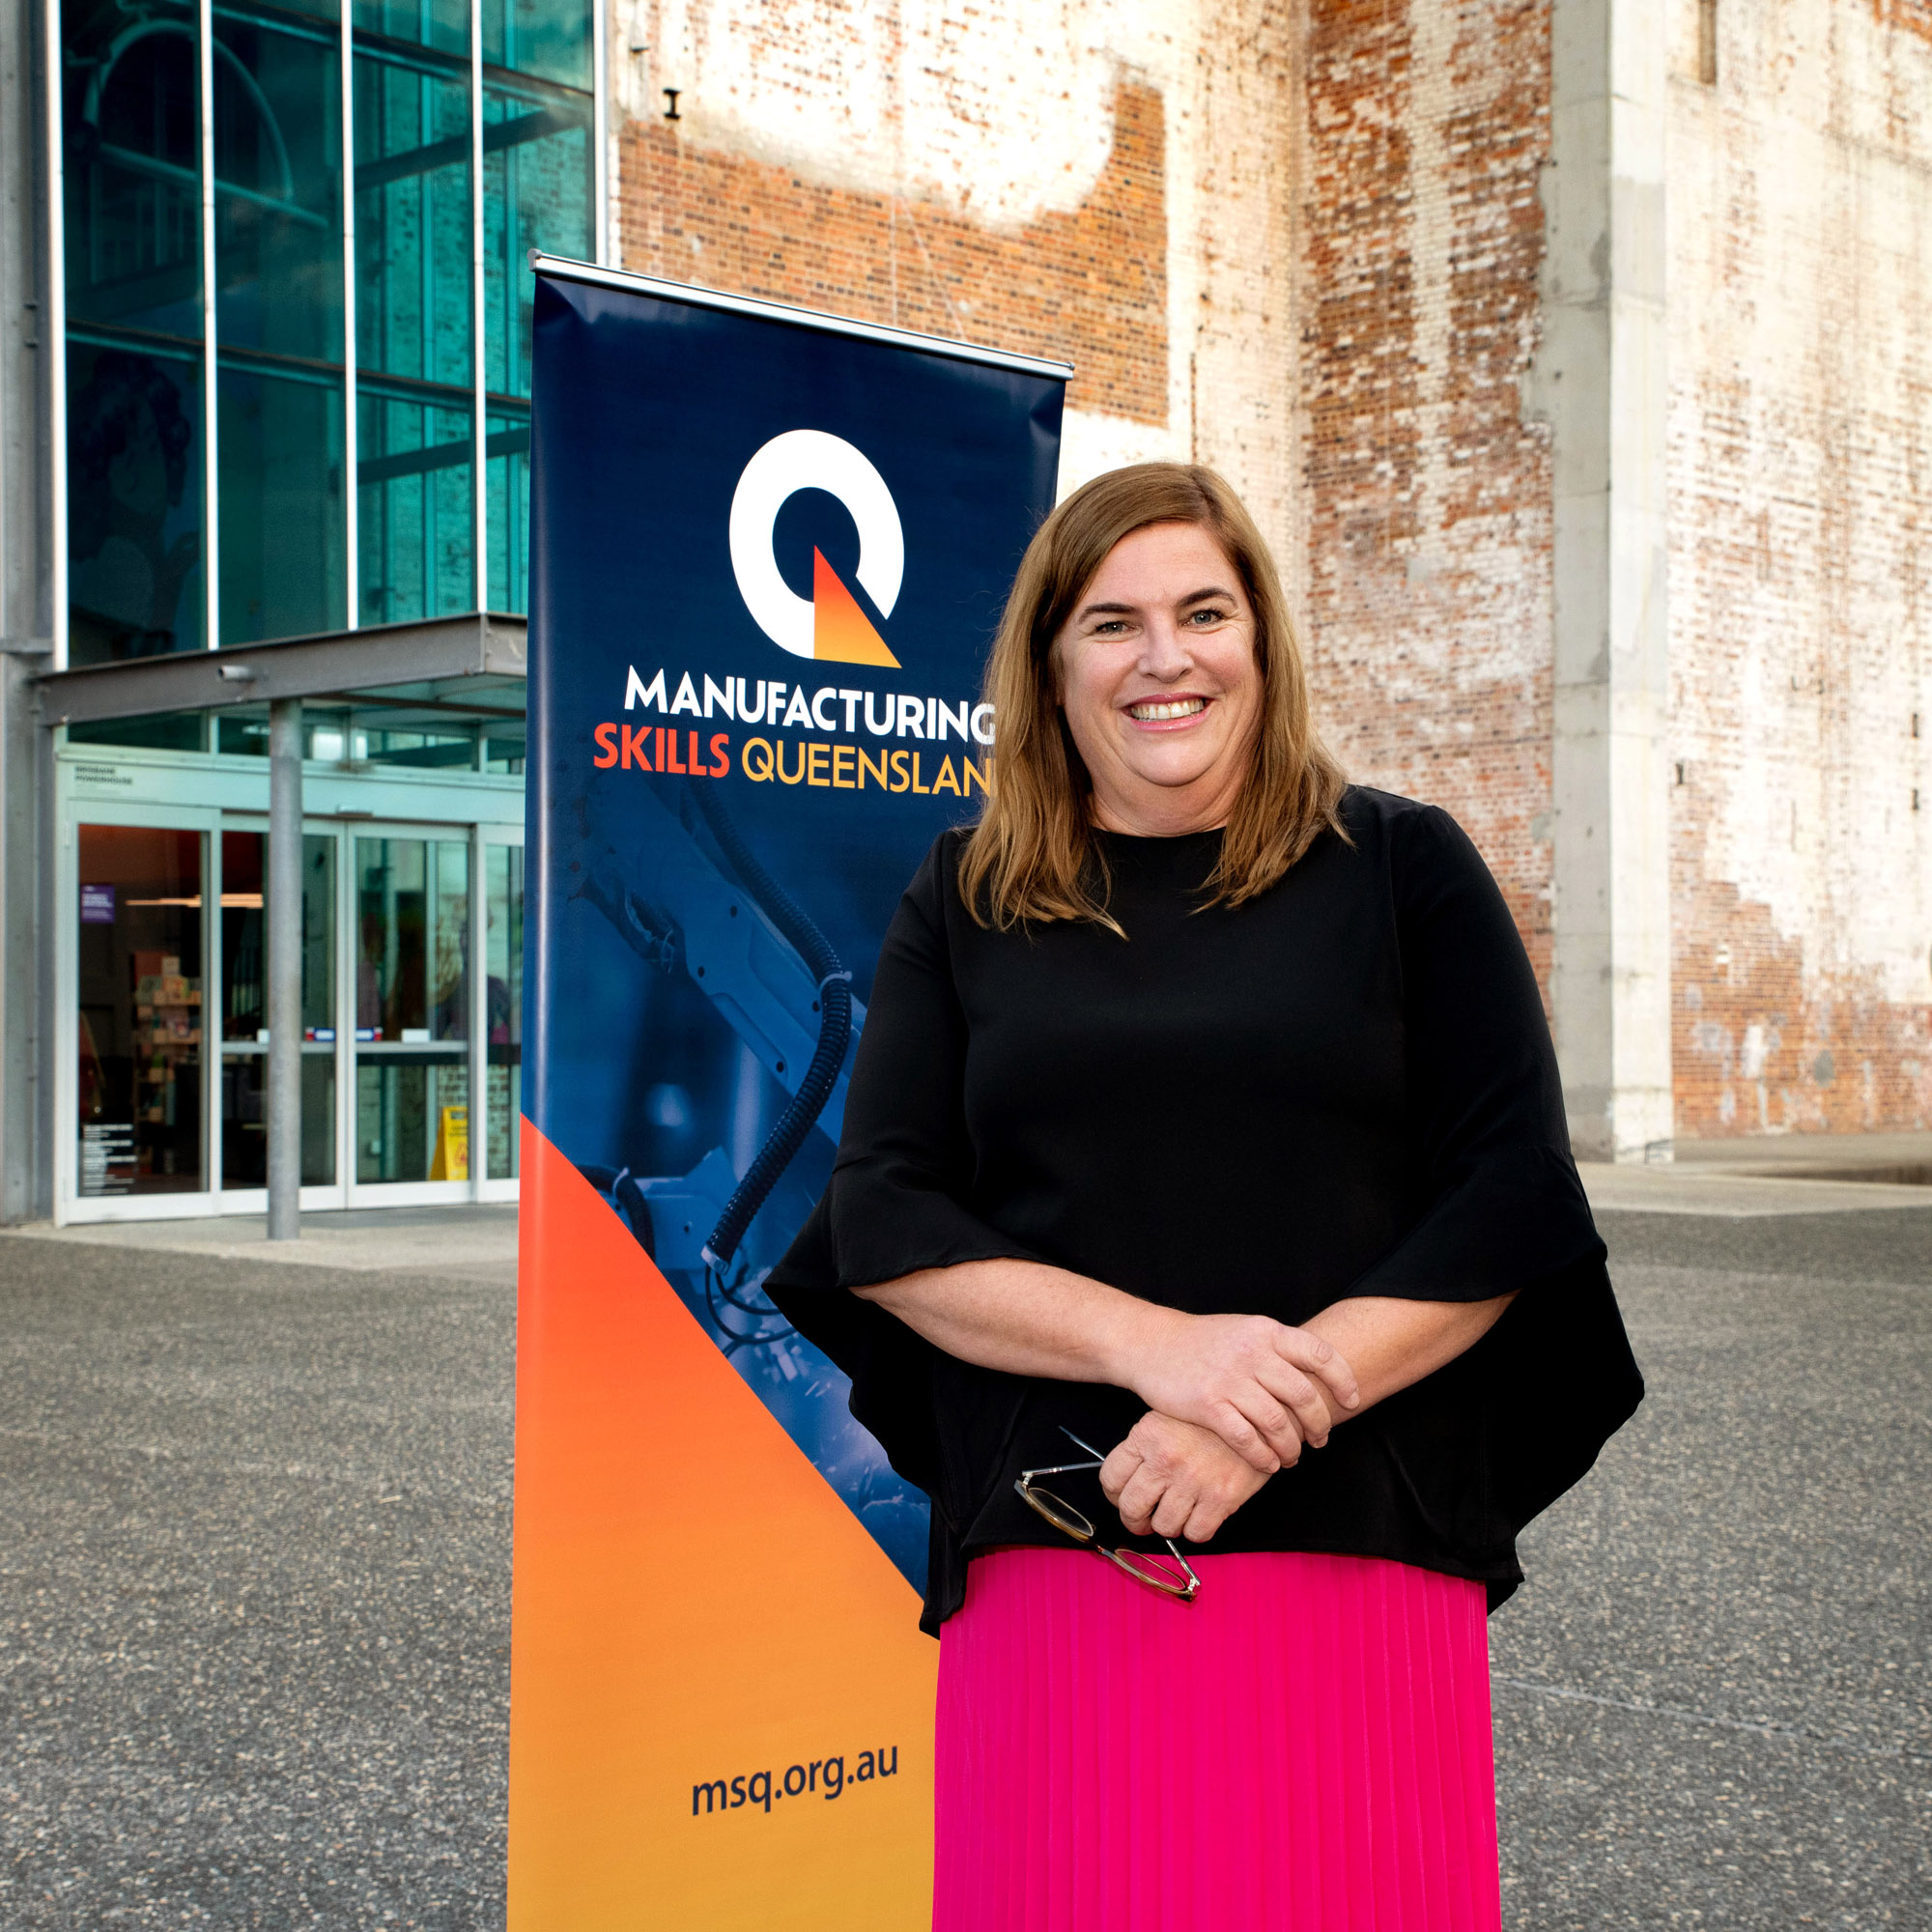 Rebecca Andrews, CEO of Manufacturing Skills Queensland, at the Launch of MSQ